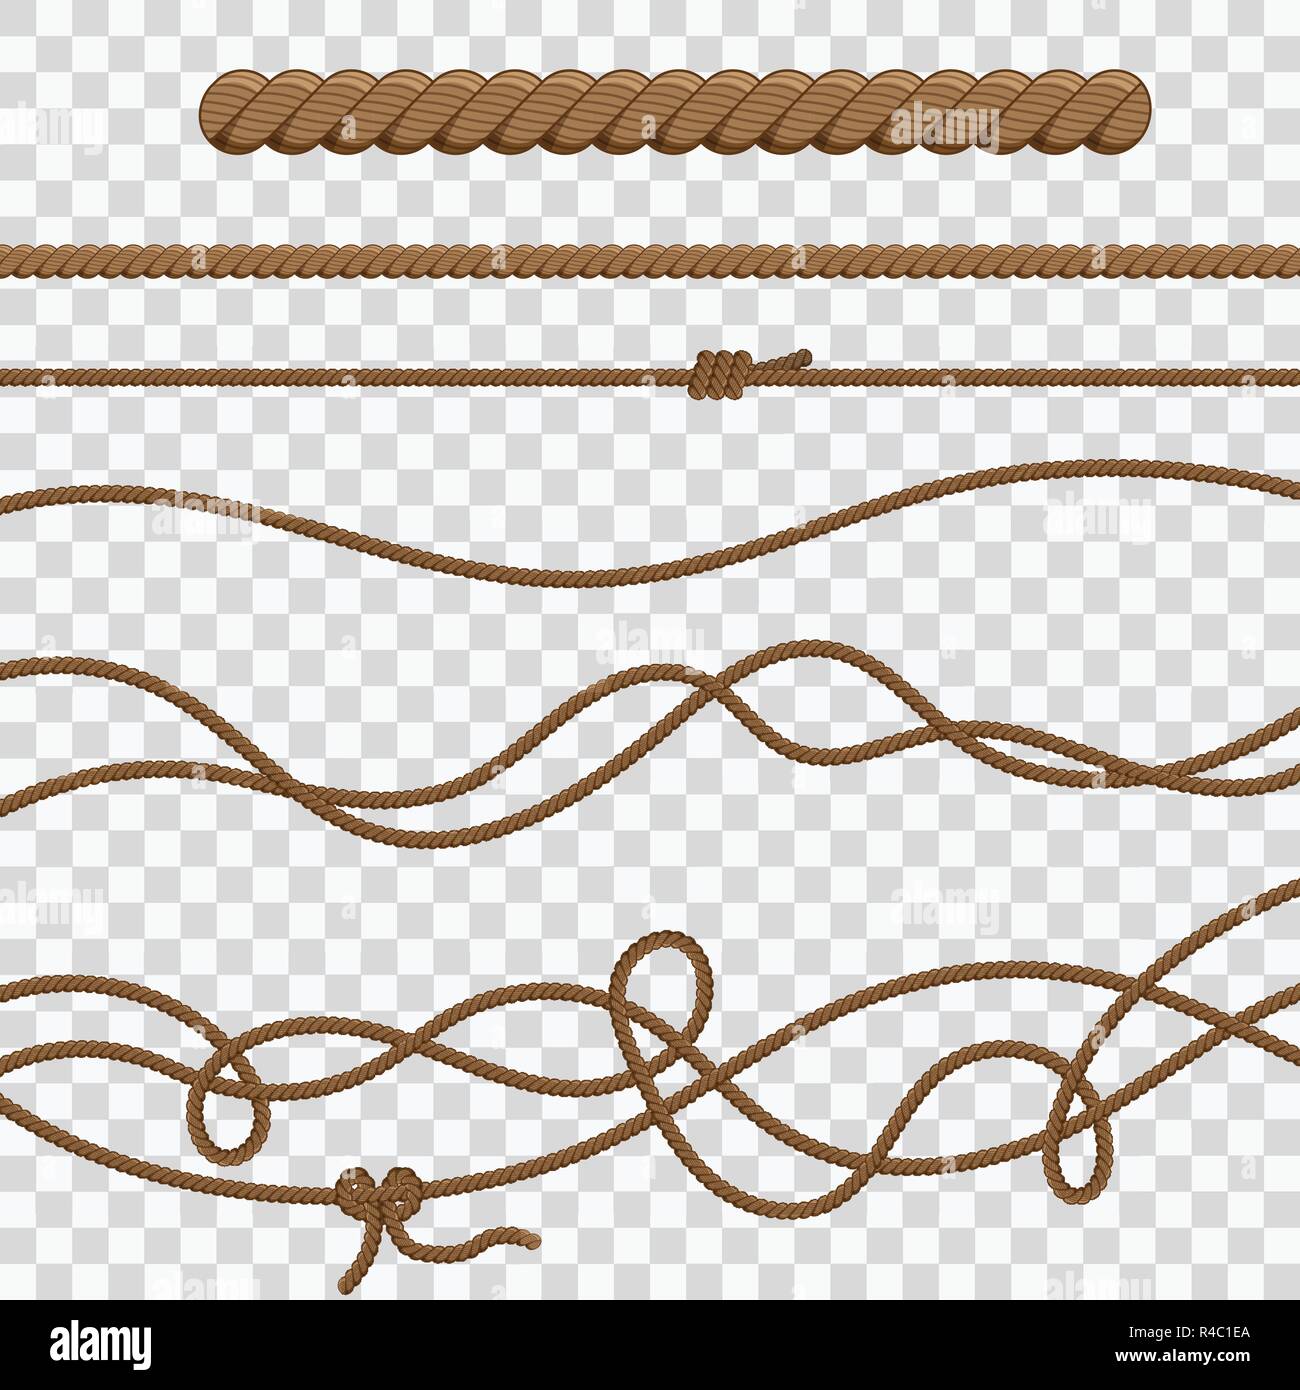 Ropes and Knots Stock Vector